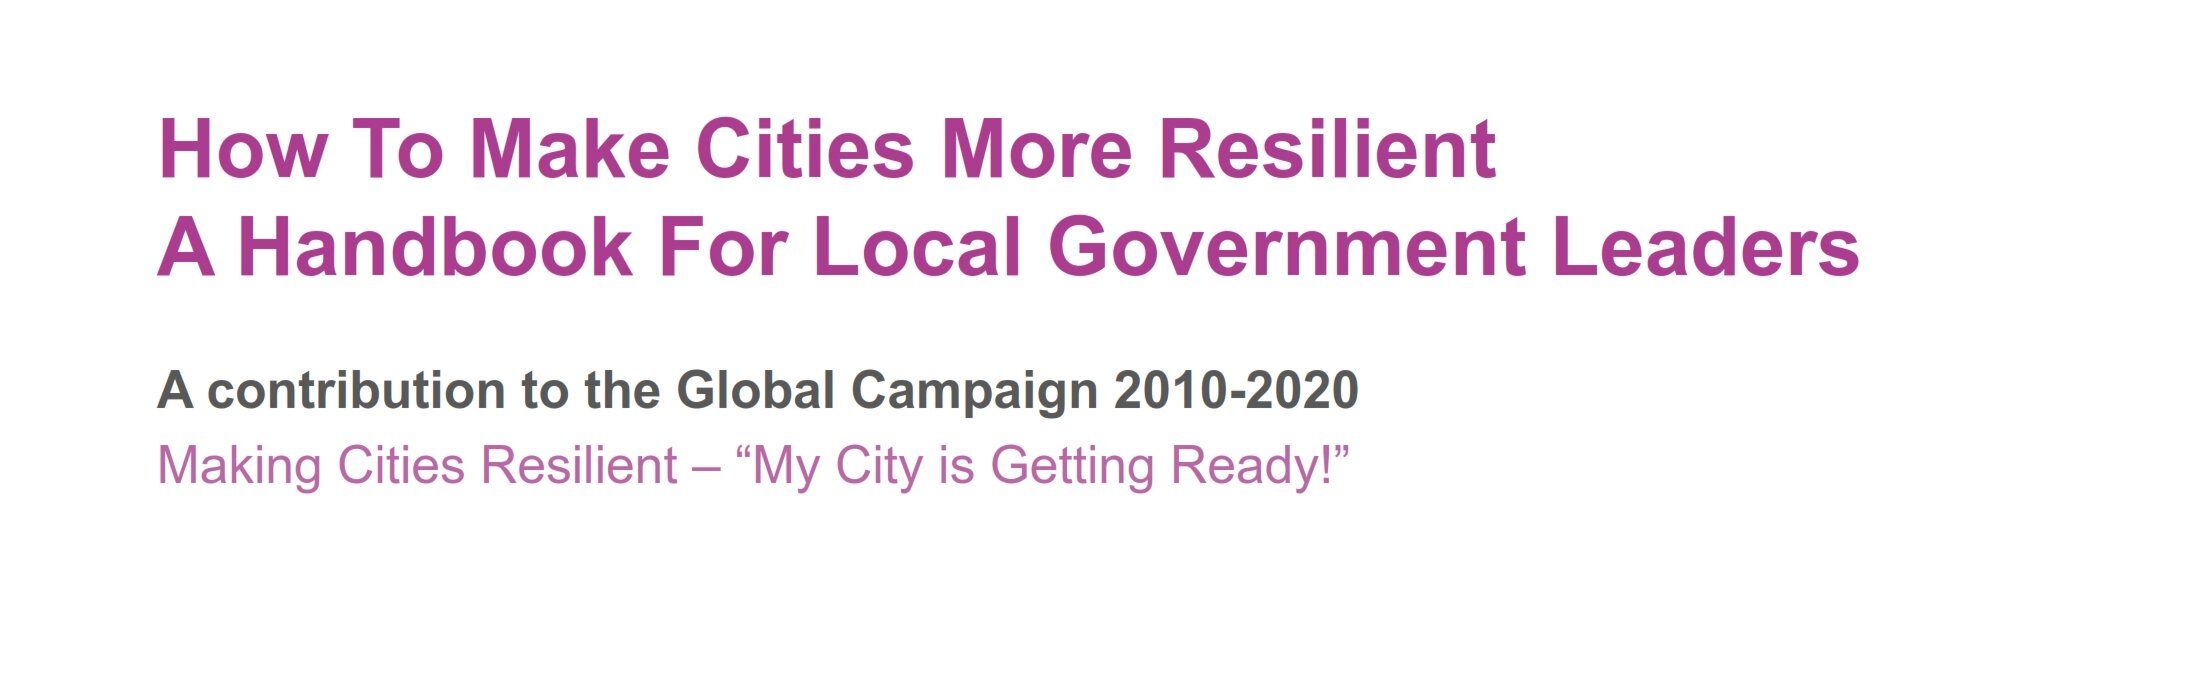 How to Make Cities More Resilient: A Handbook for Local Government Leaders